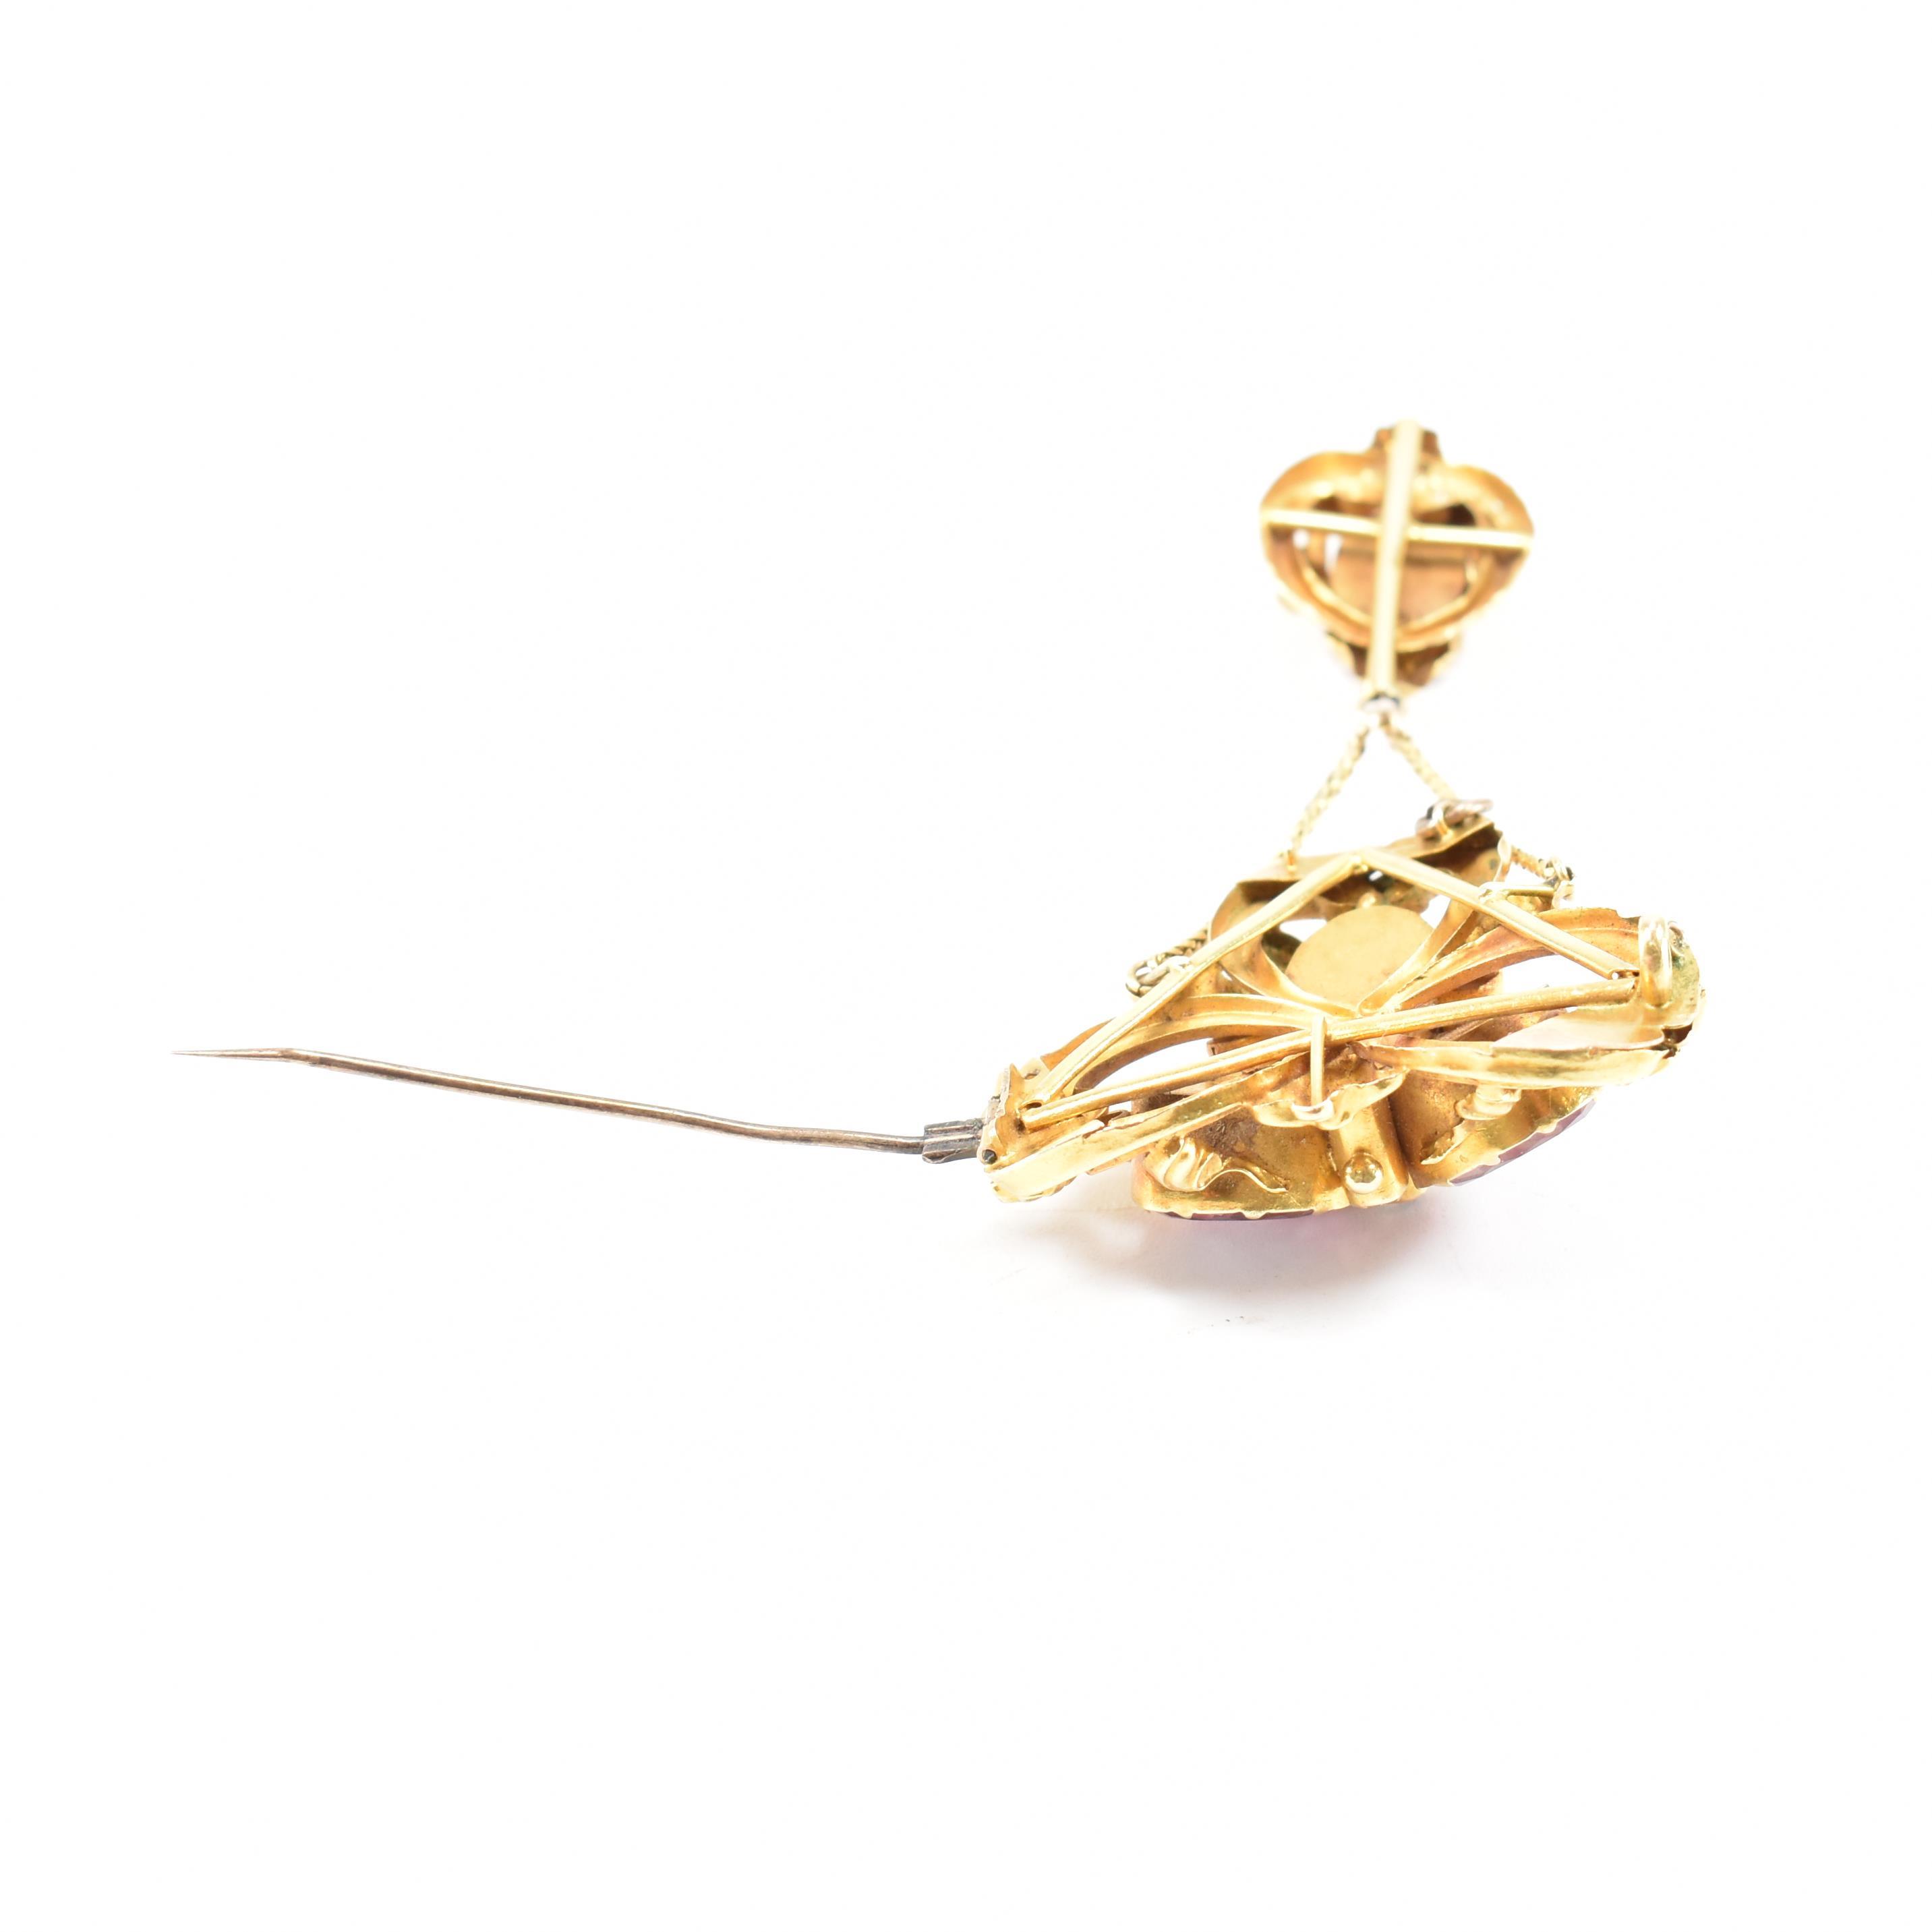 VICTORIAN GOLD ROCK CRYSTAL PENDANT BROOCH - Image 5 of 5